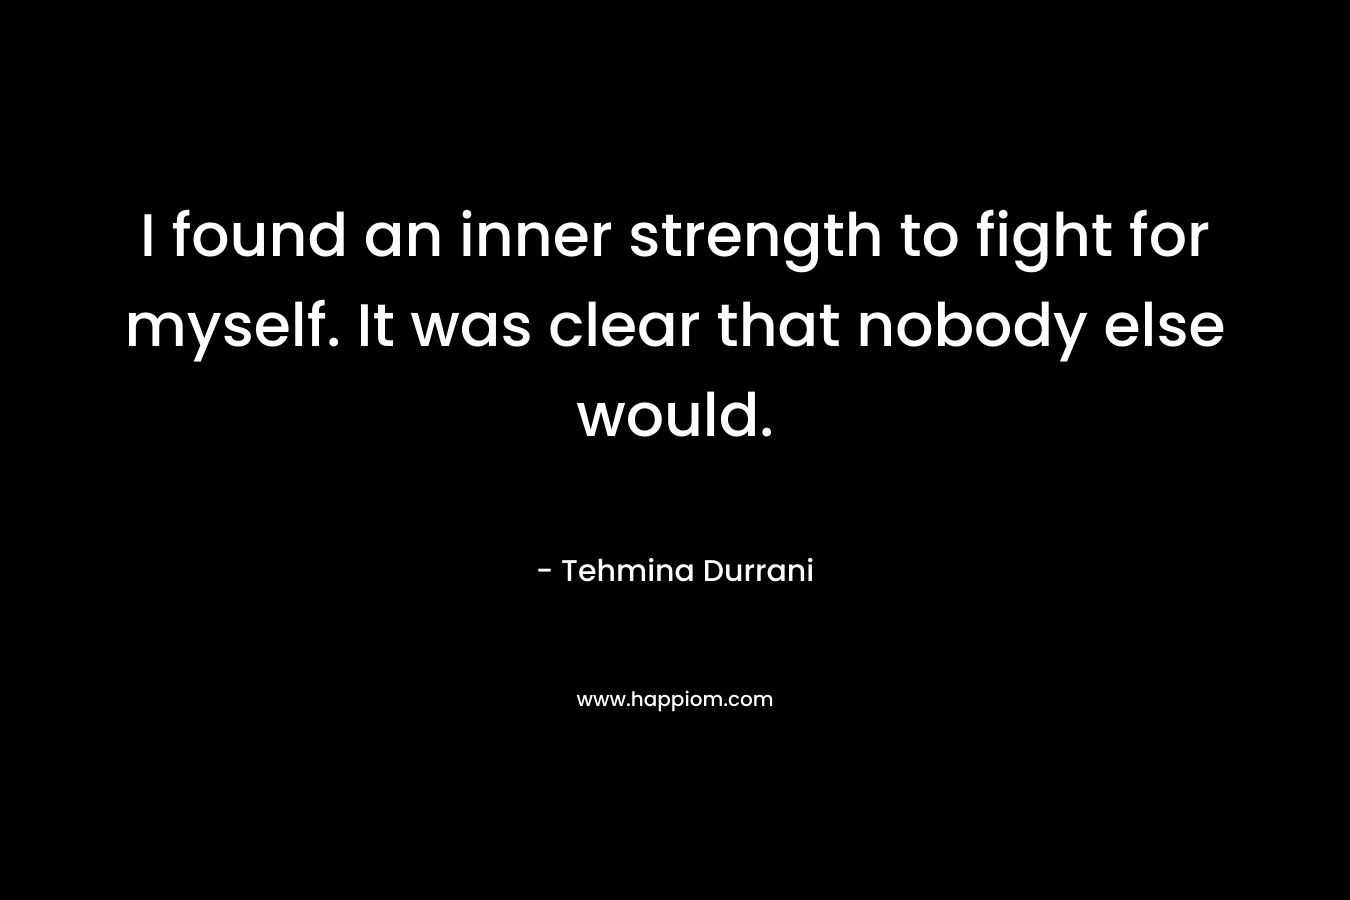 I found an inner strength to fight for myself. It was clear that nobody else would.